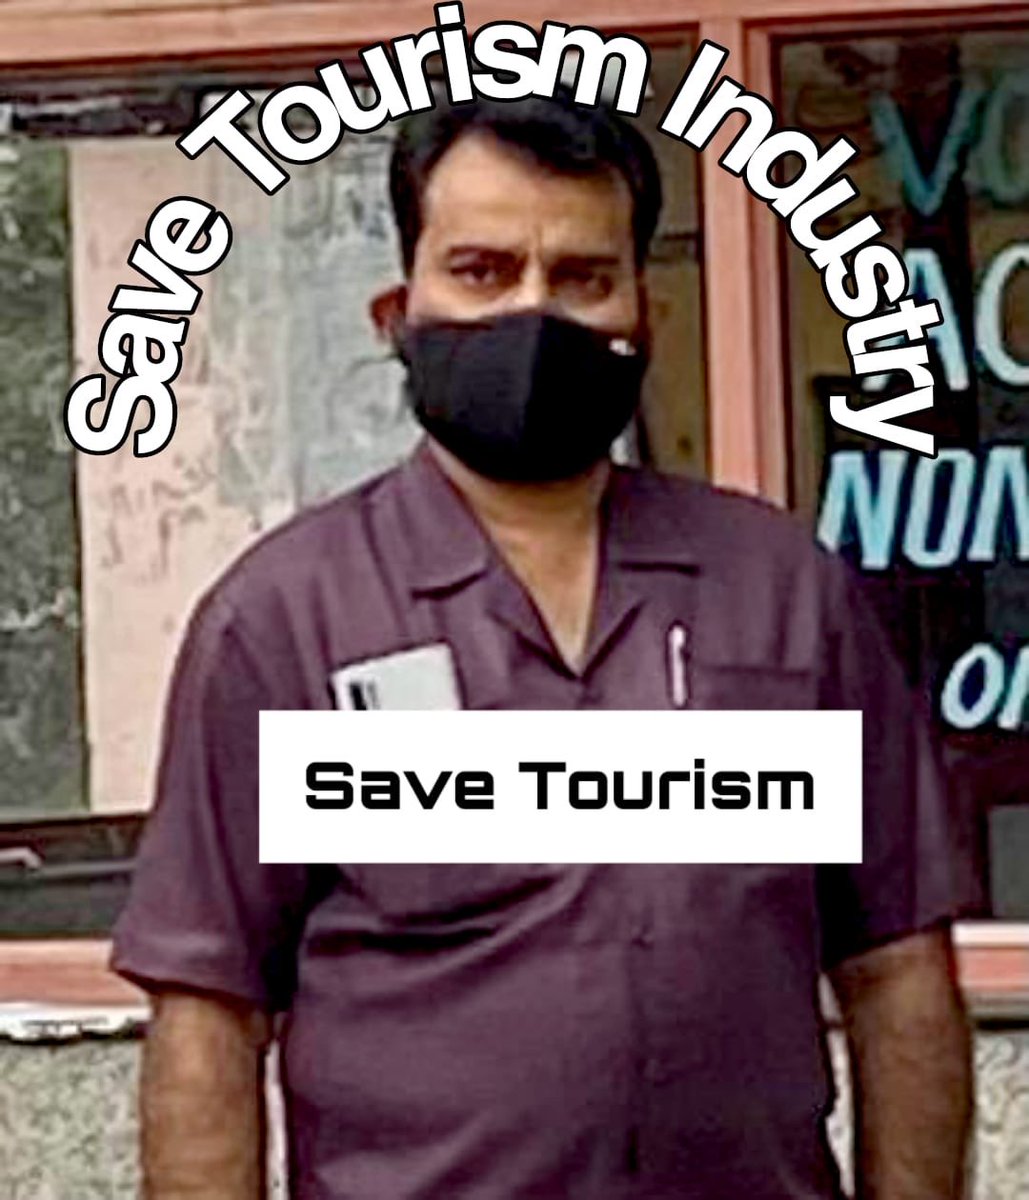 #savetourism #Mayday ⁦@PMOIndia⁩ ⁦@nsitharaman⁩ ⁦@prahladspatel⁩ ⁦@nitin_gadkari⁩ ⁦@NITIAayog⁩ Respected PM and TM Sr , Last One Years We all Regional Level Guides are jobless nobody is listening our problems it’s very Shameful for Tourism industry🙏